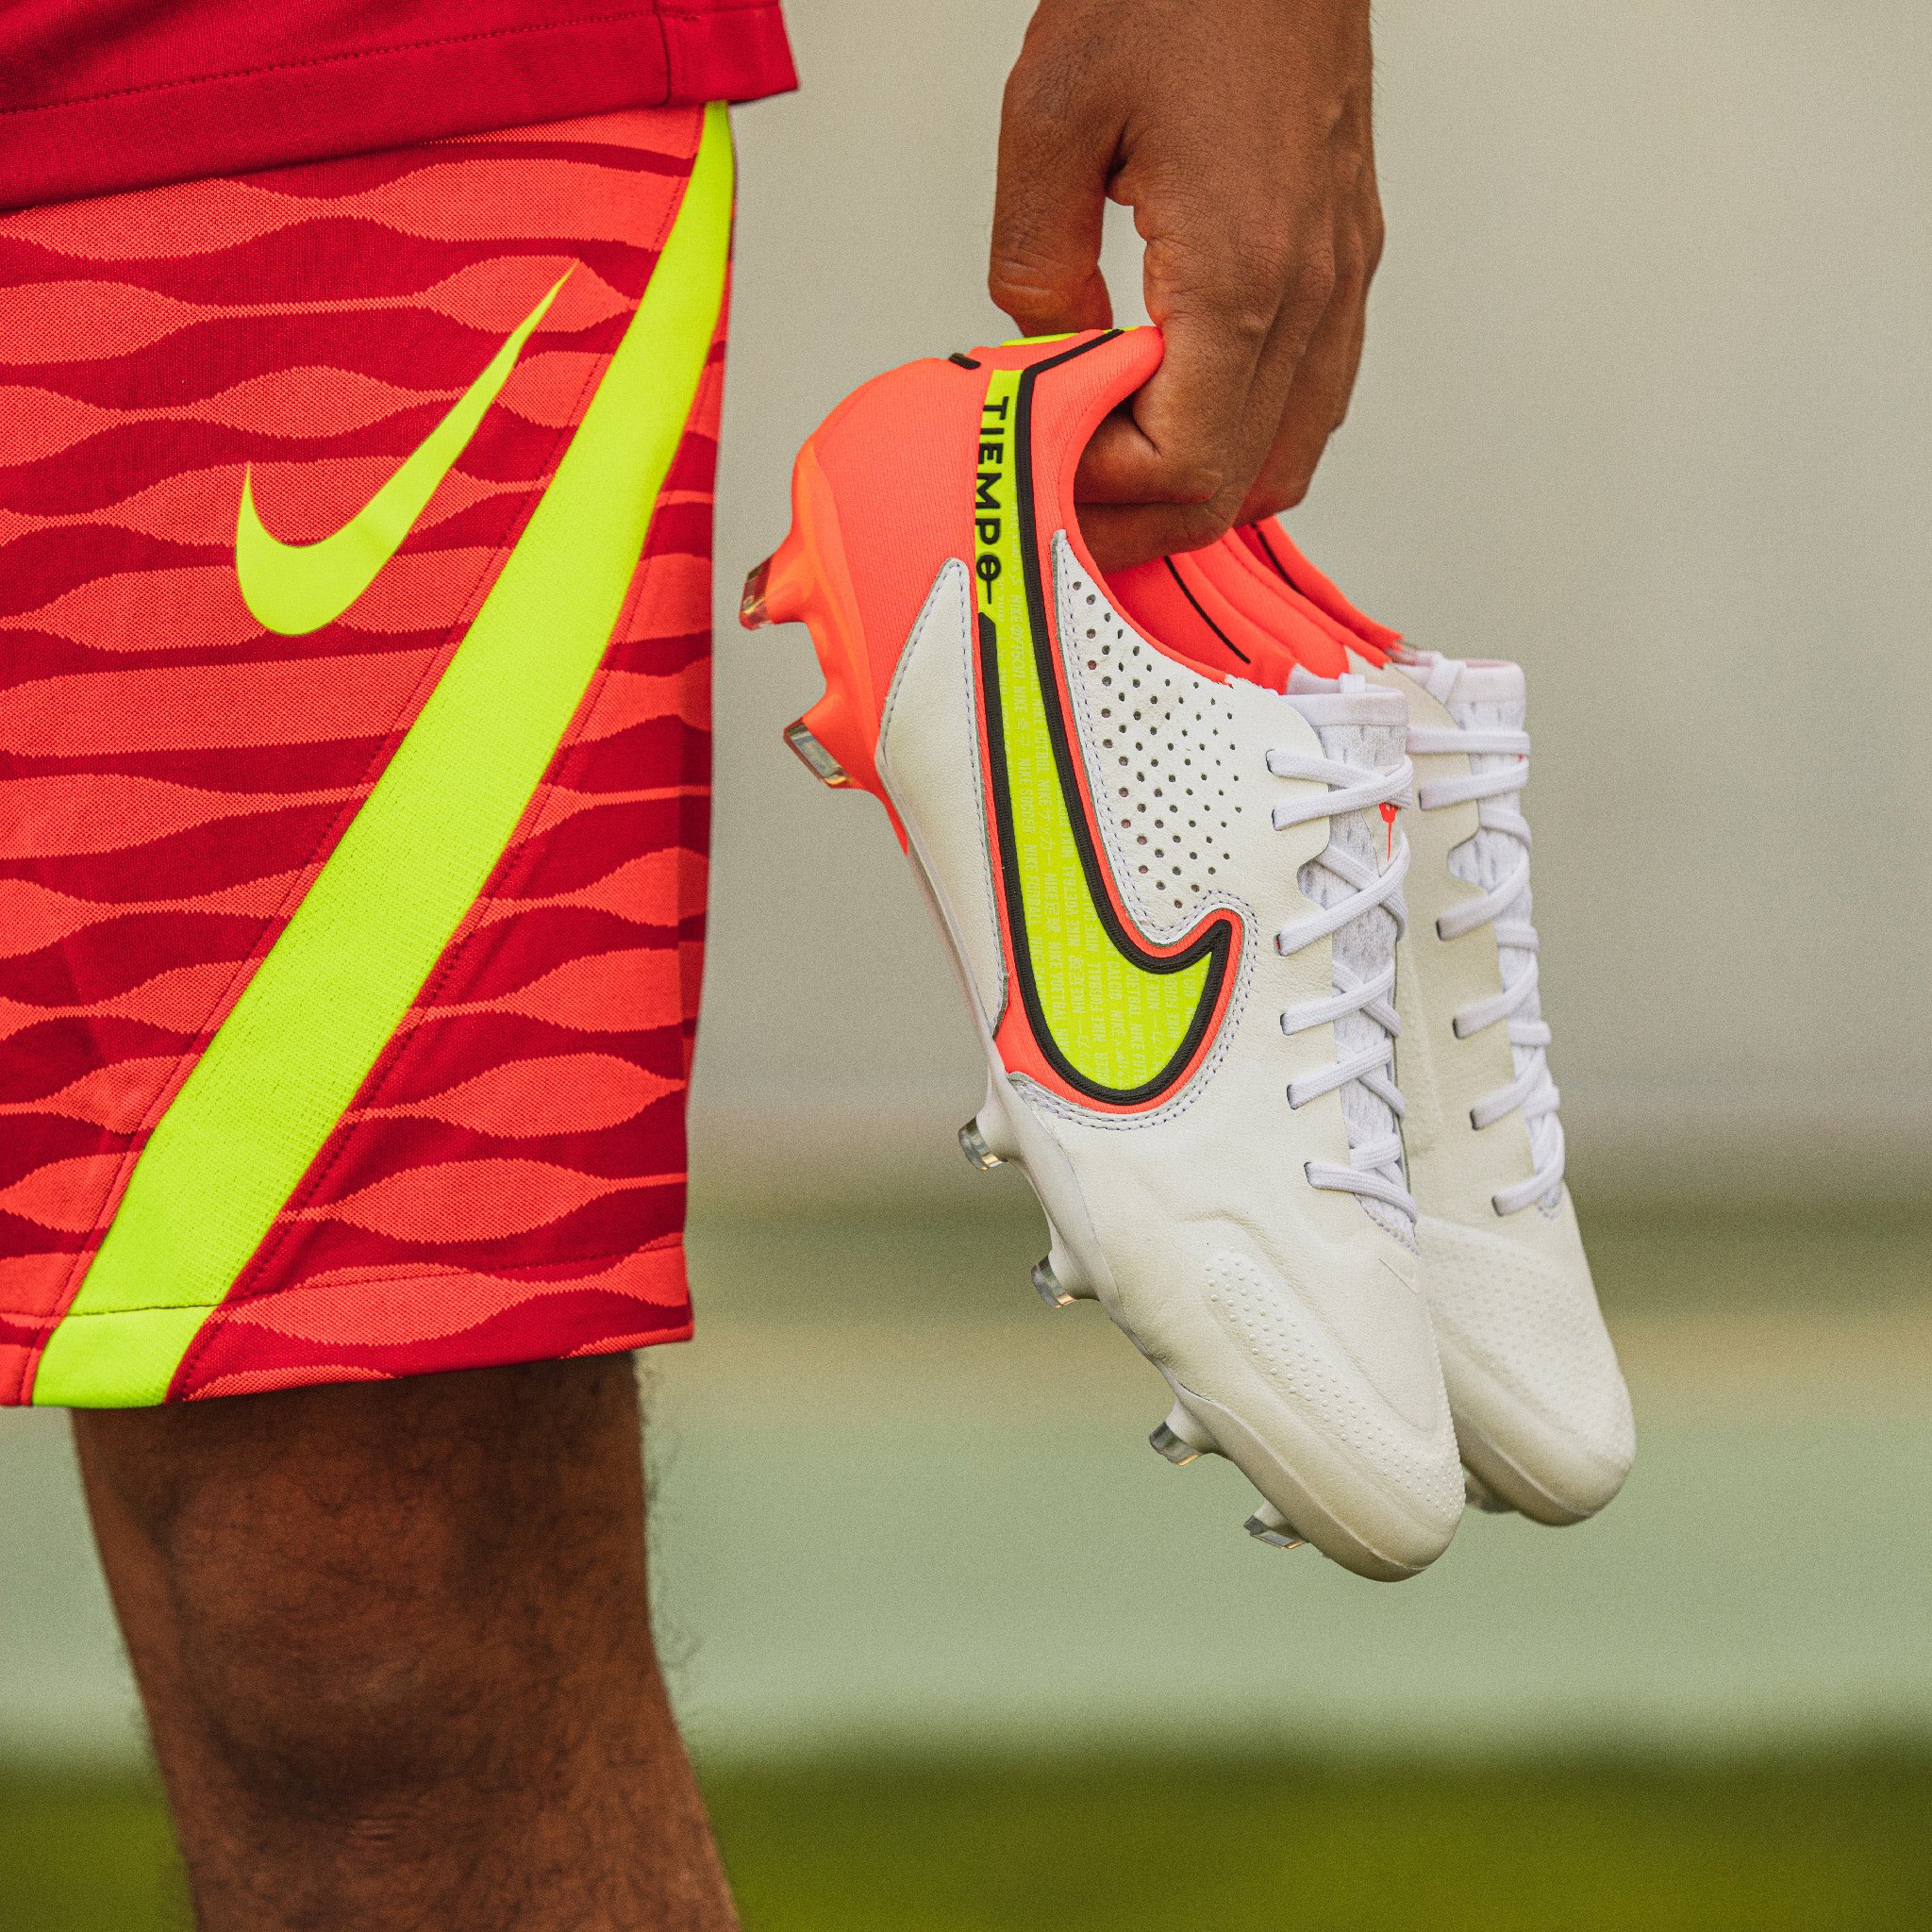 Nike Football on Twitter: "Find your motivation from the ground up with the new Nike Football Motivation the Tiempo Legend 9, the Mercurial Superfly 8, the Mercurial Vapor 14, the Phantom